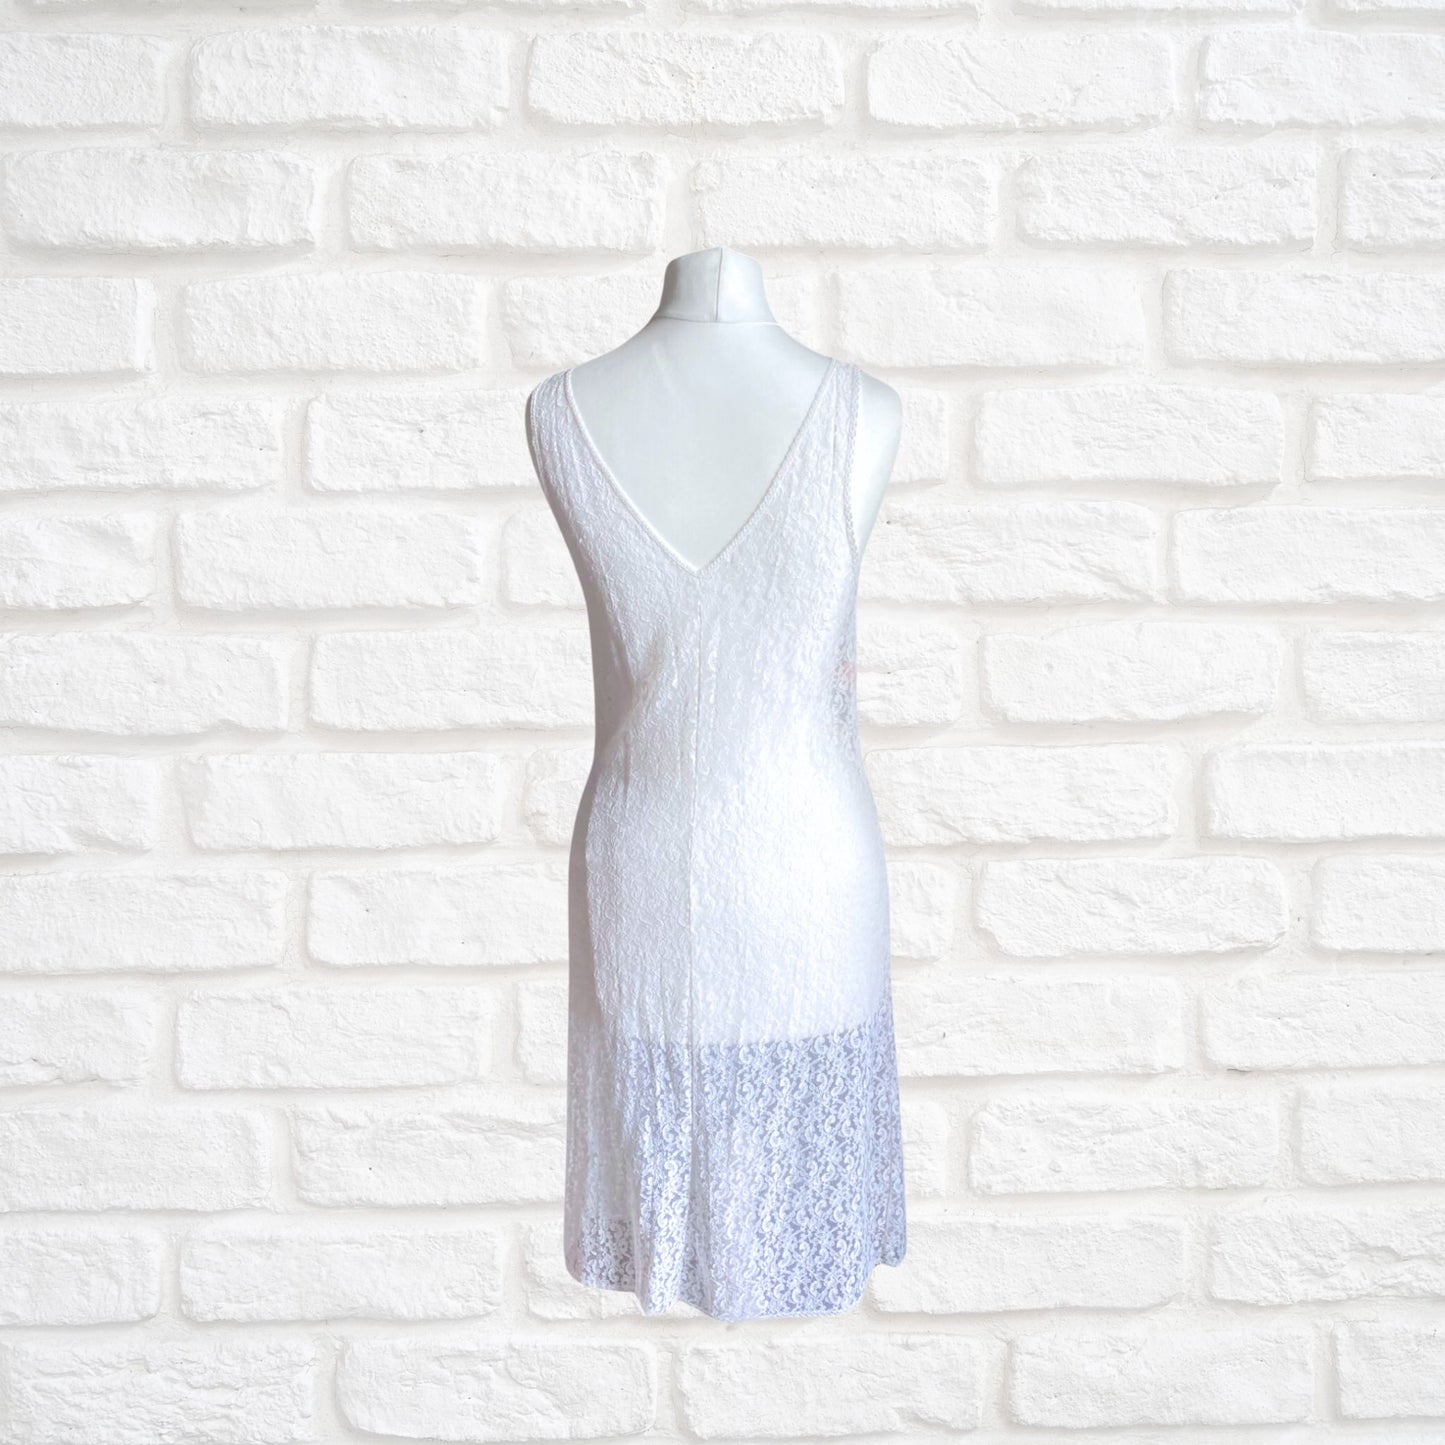 Vintage 60s White Lace Fitted Slip Dress with bow detail. Approx U.K. size 4-6